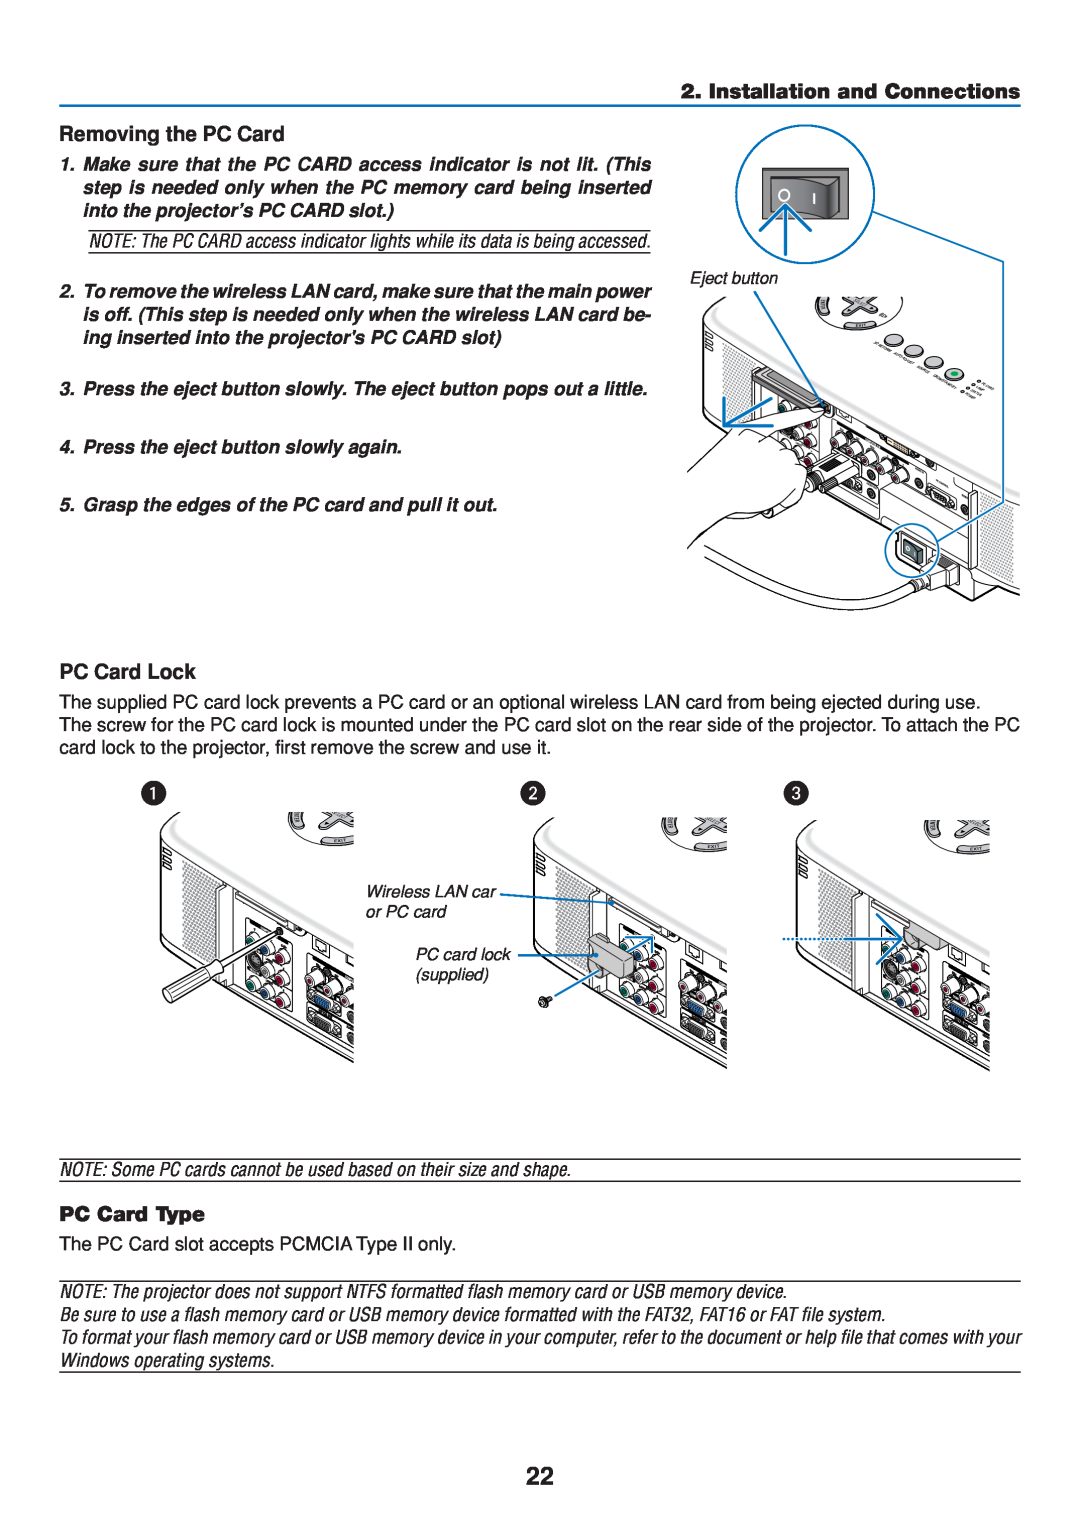 Dukane 8808 user manual Removing the PC Card, PC Card Lock, PC Card Type, Installation and Connections 